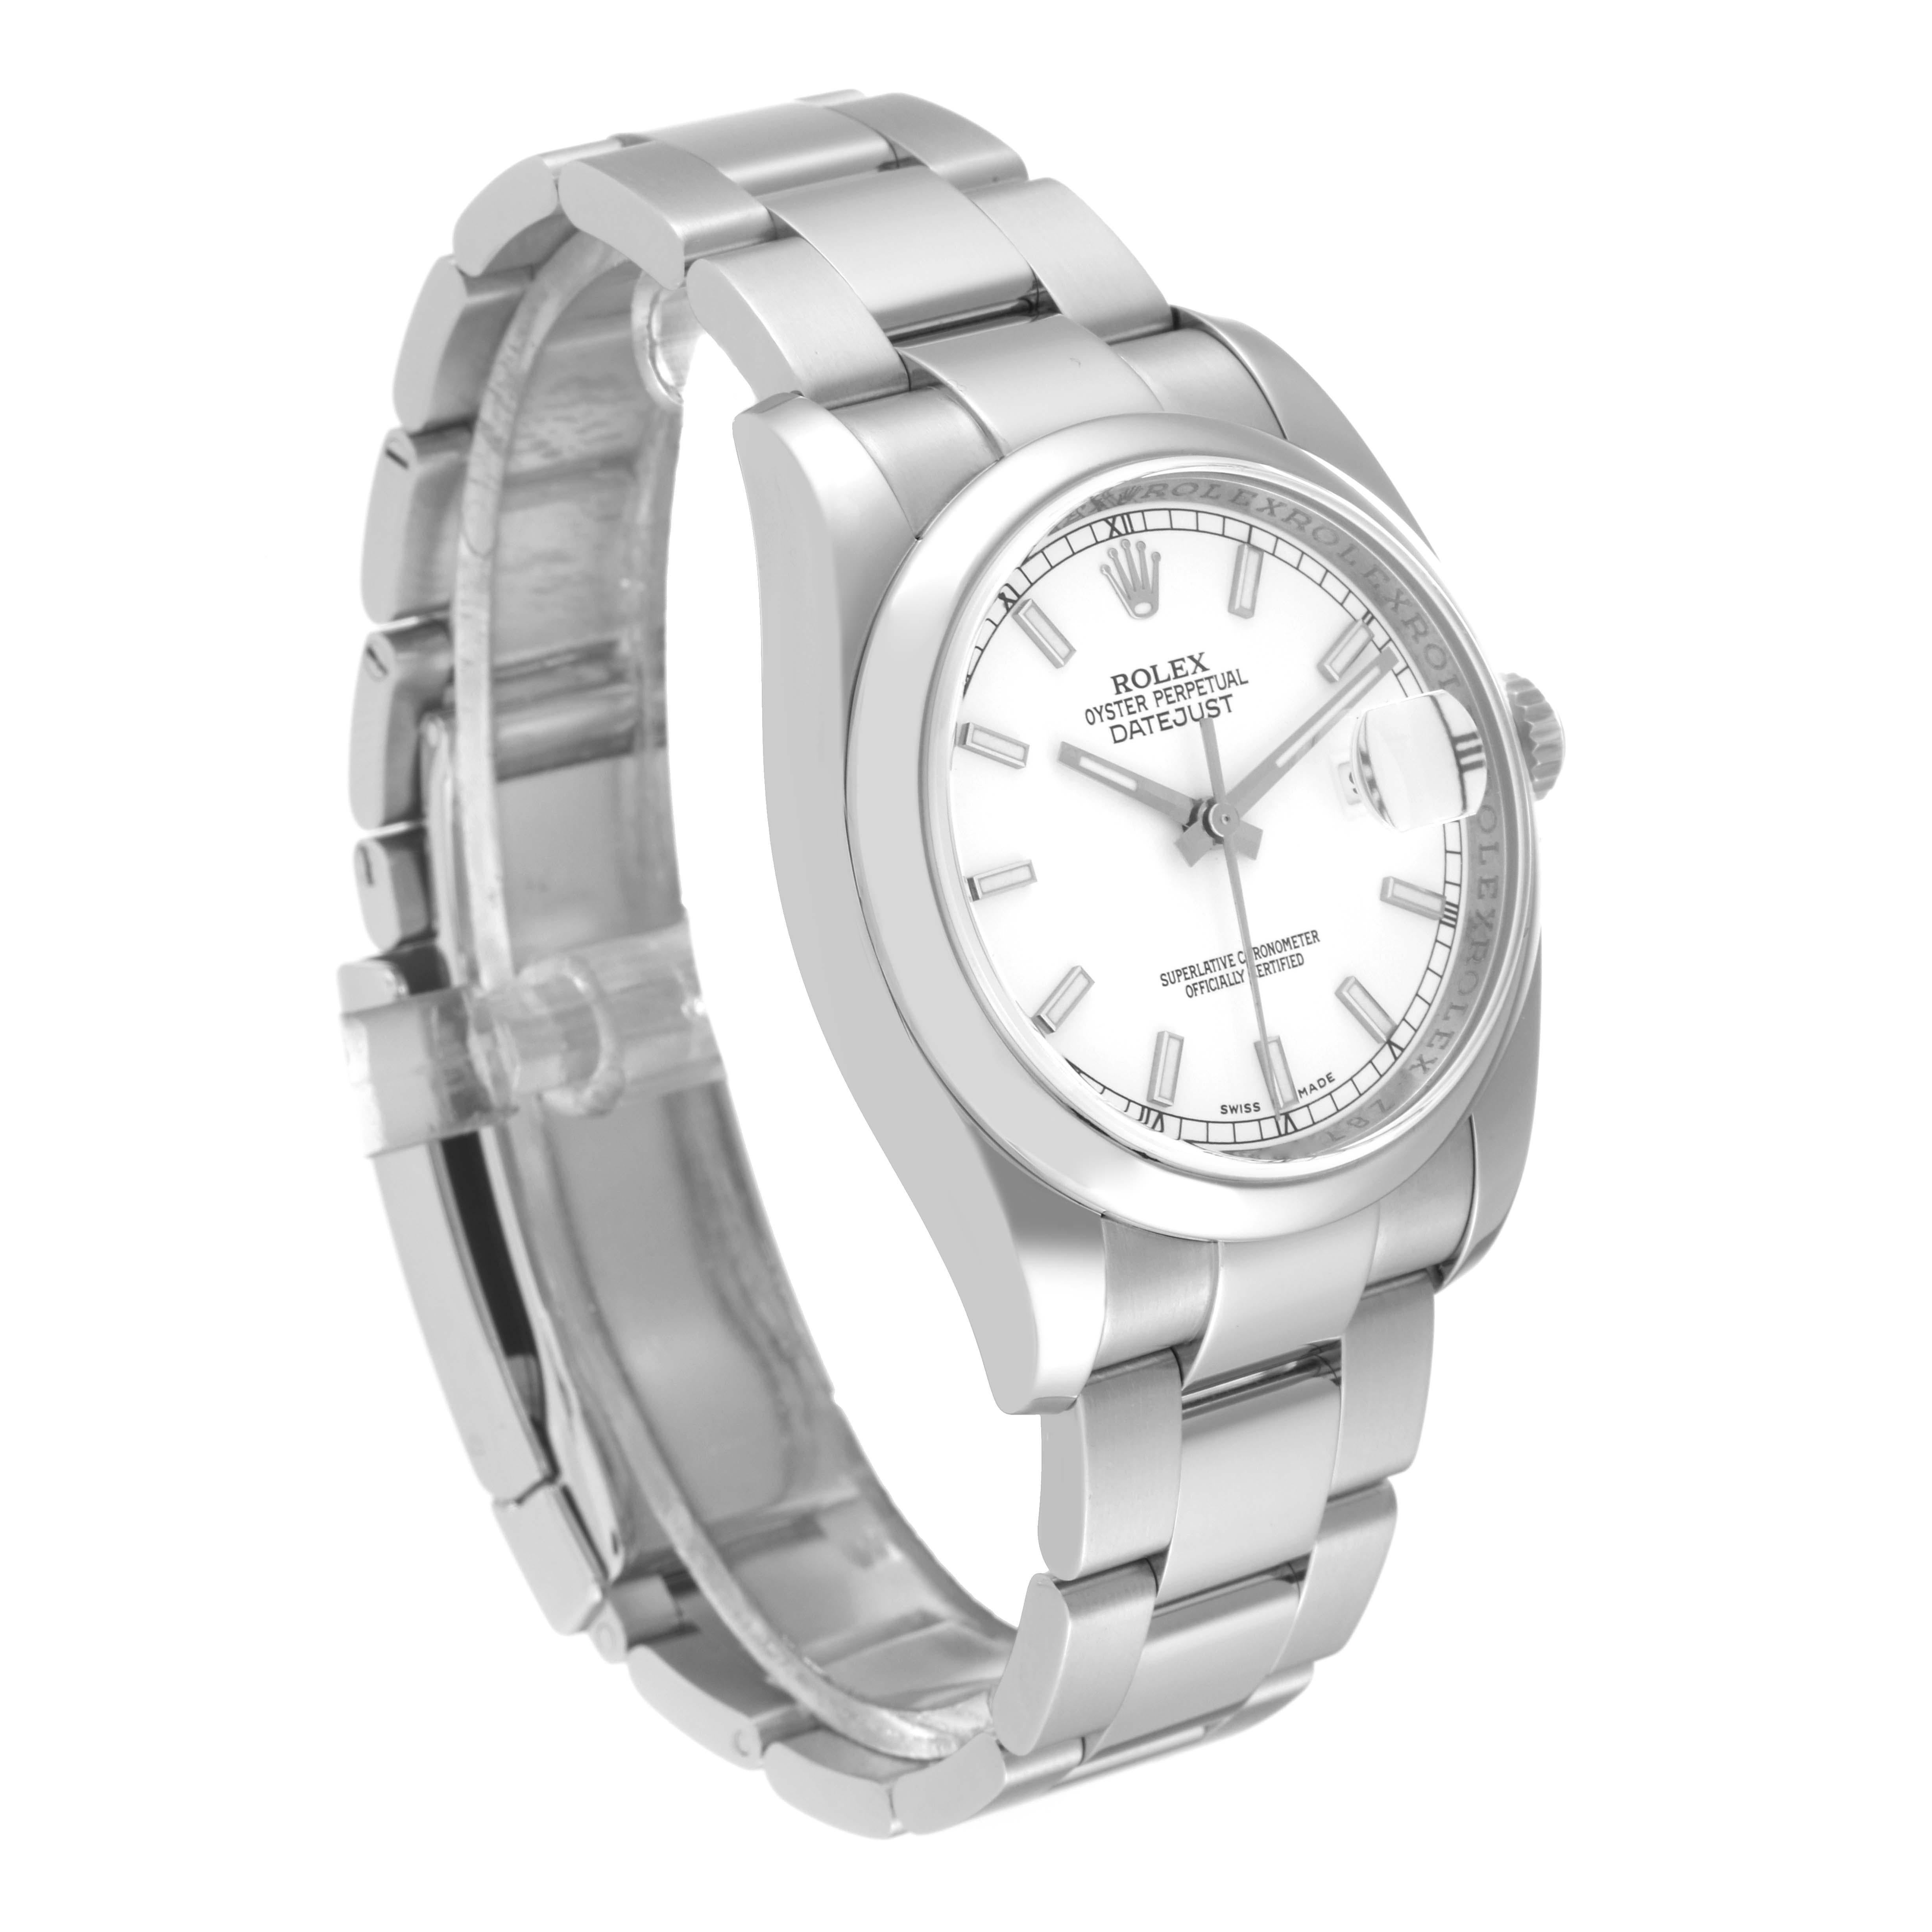 Rolex Datejust White Dial Oyster Bracelet Steel Mens Watch 116200 For Sale 5